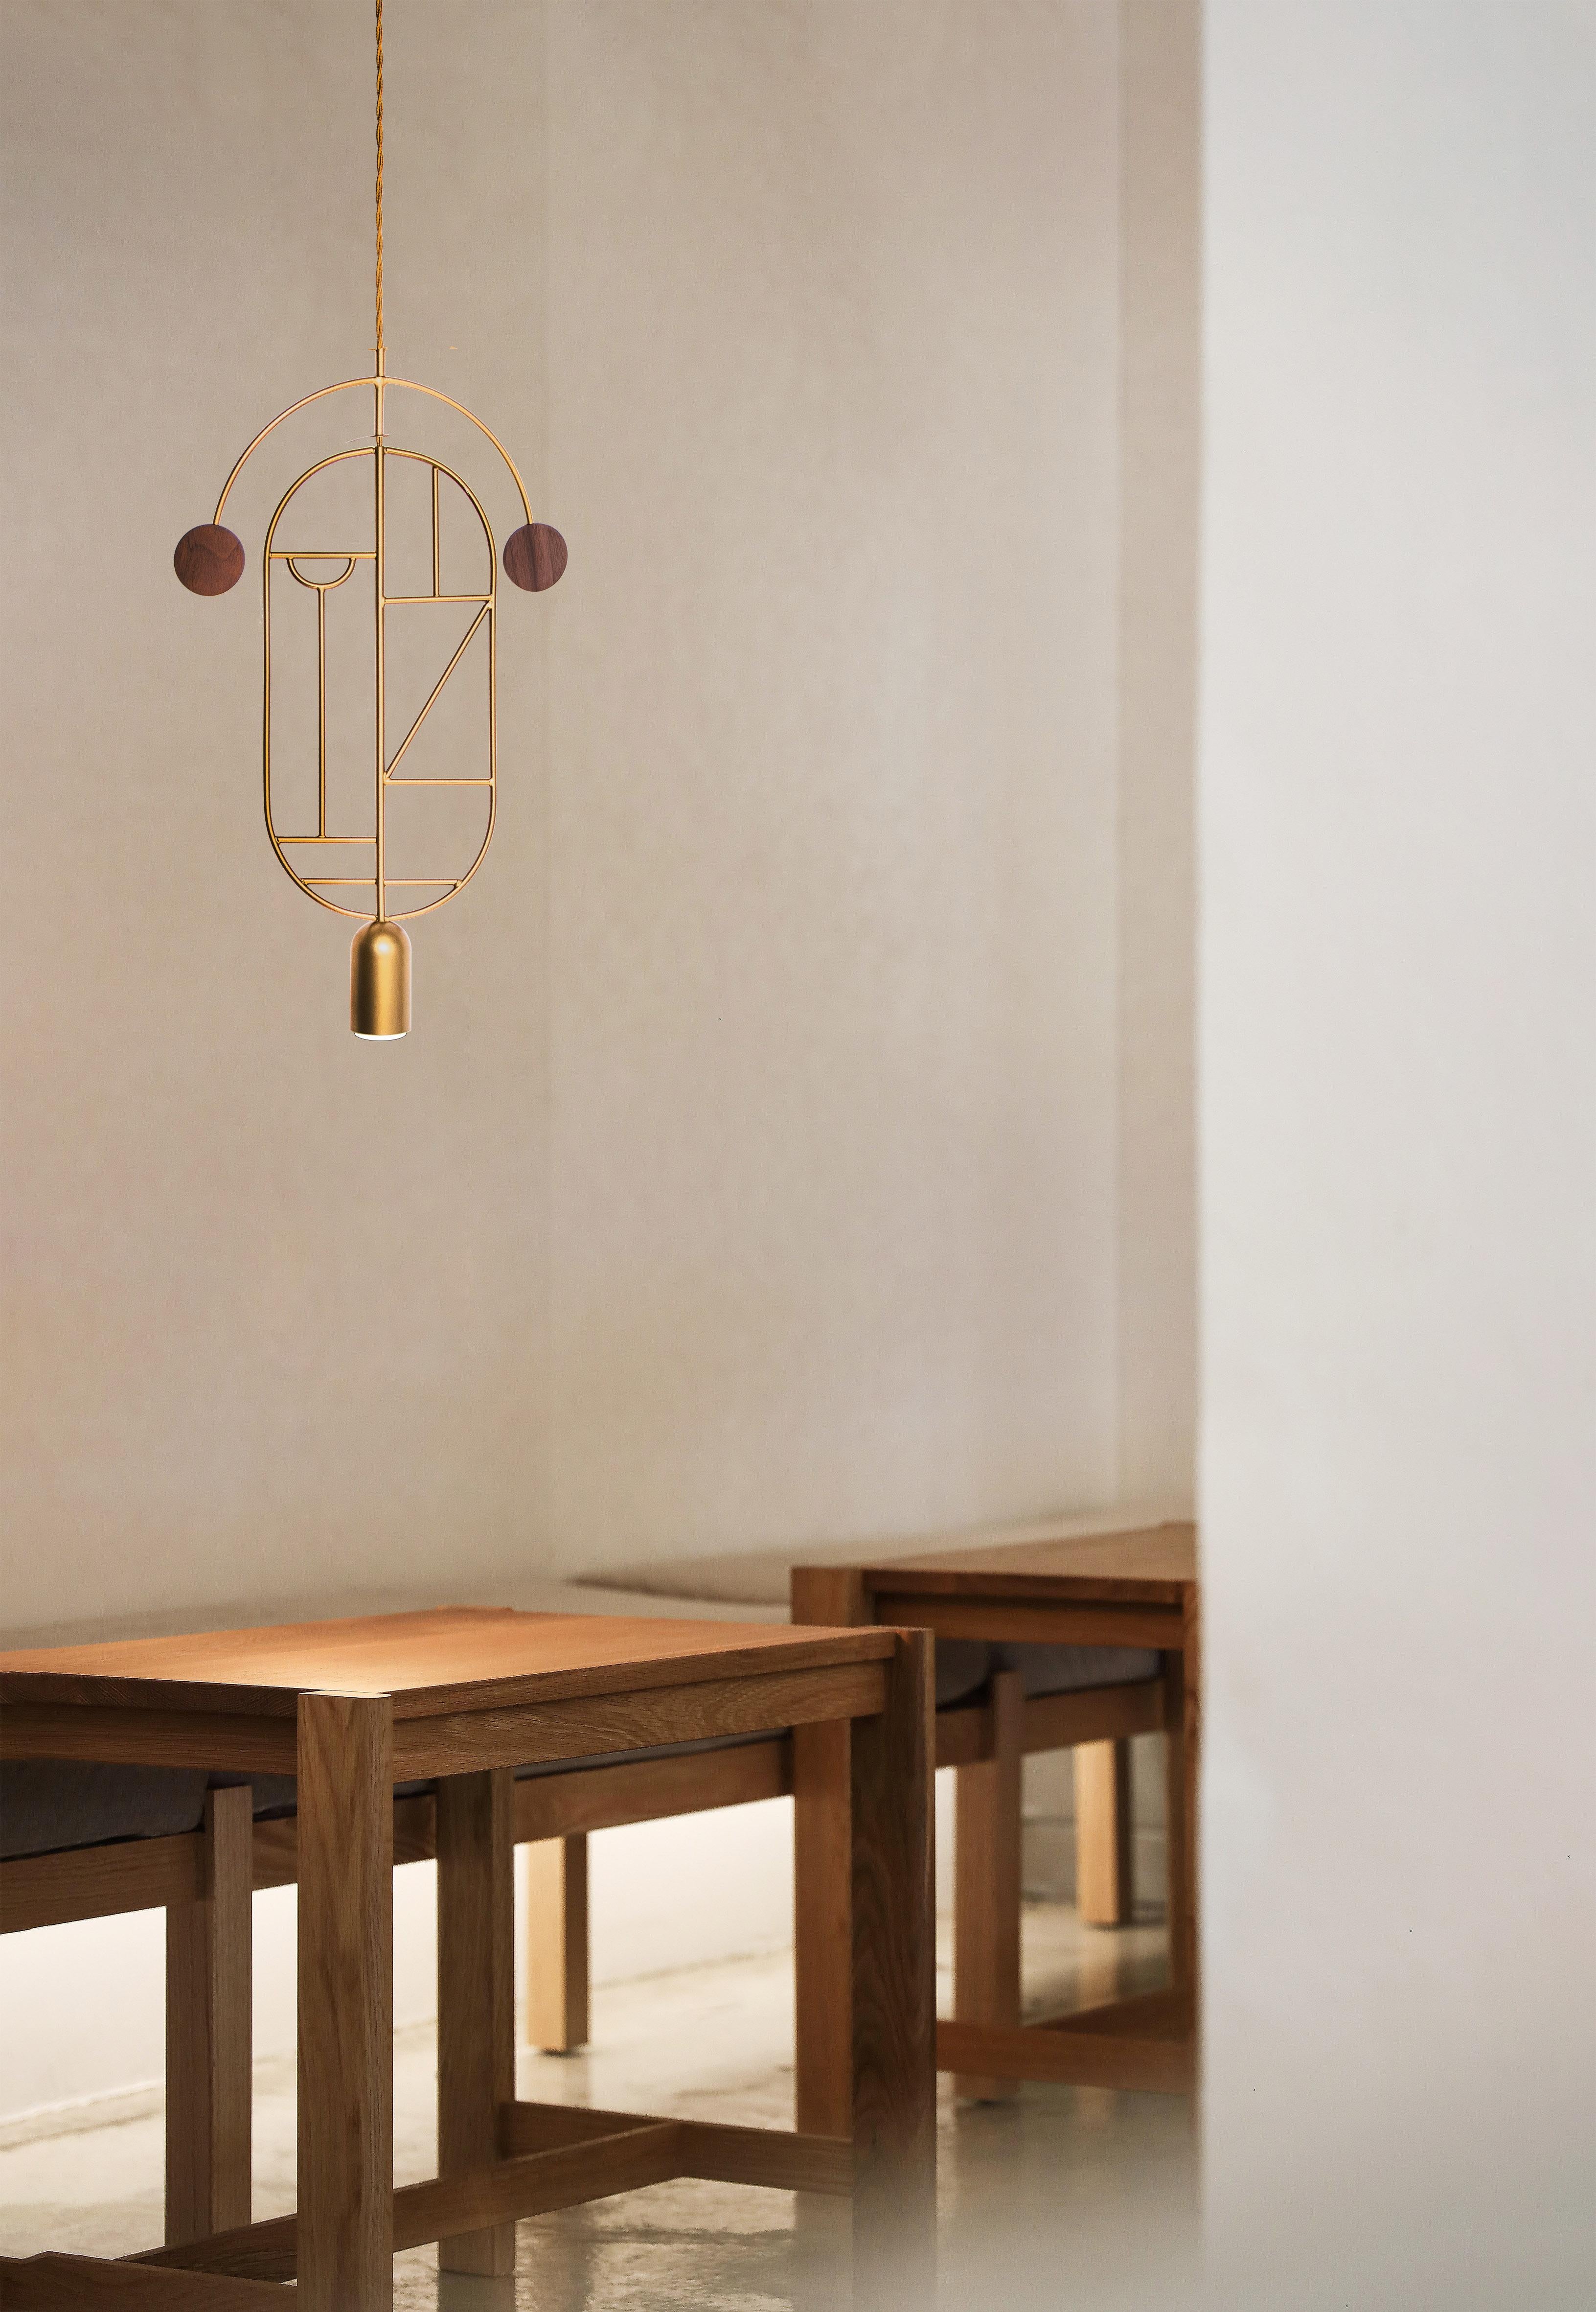 Delicate and soft design where the metal draws an elegant body combined with the warmth of the natural walnut details. A design that dresses a cozy ambient light.

The combination of metallic body with natural walnut or colored stained details,